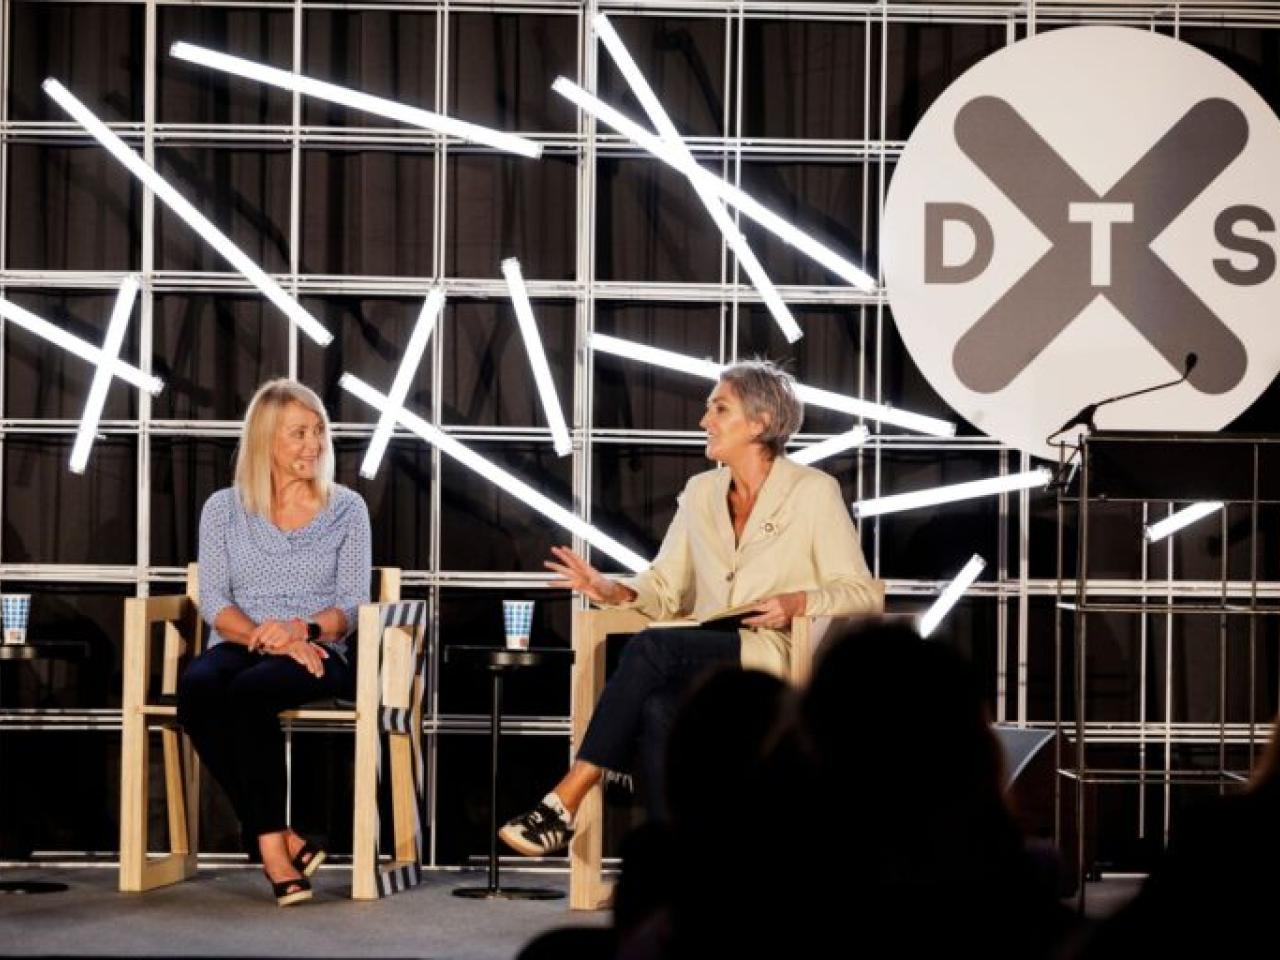 Two people seated on a stage. DTS logo displayed behind them.